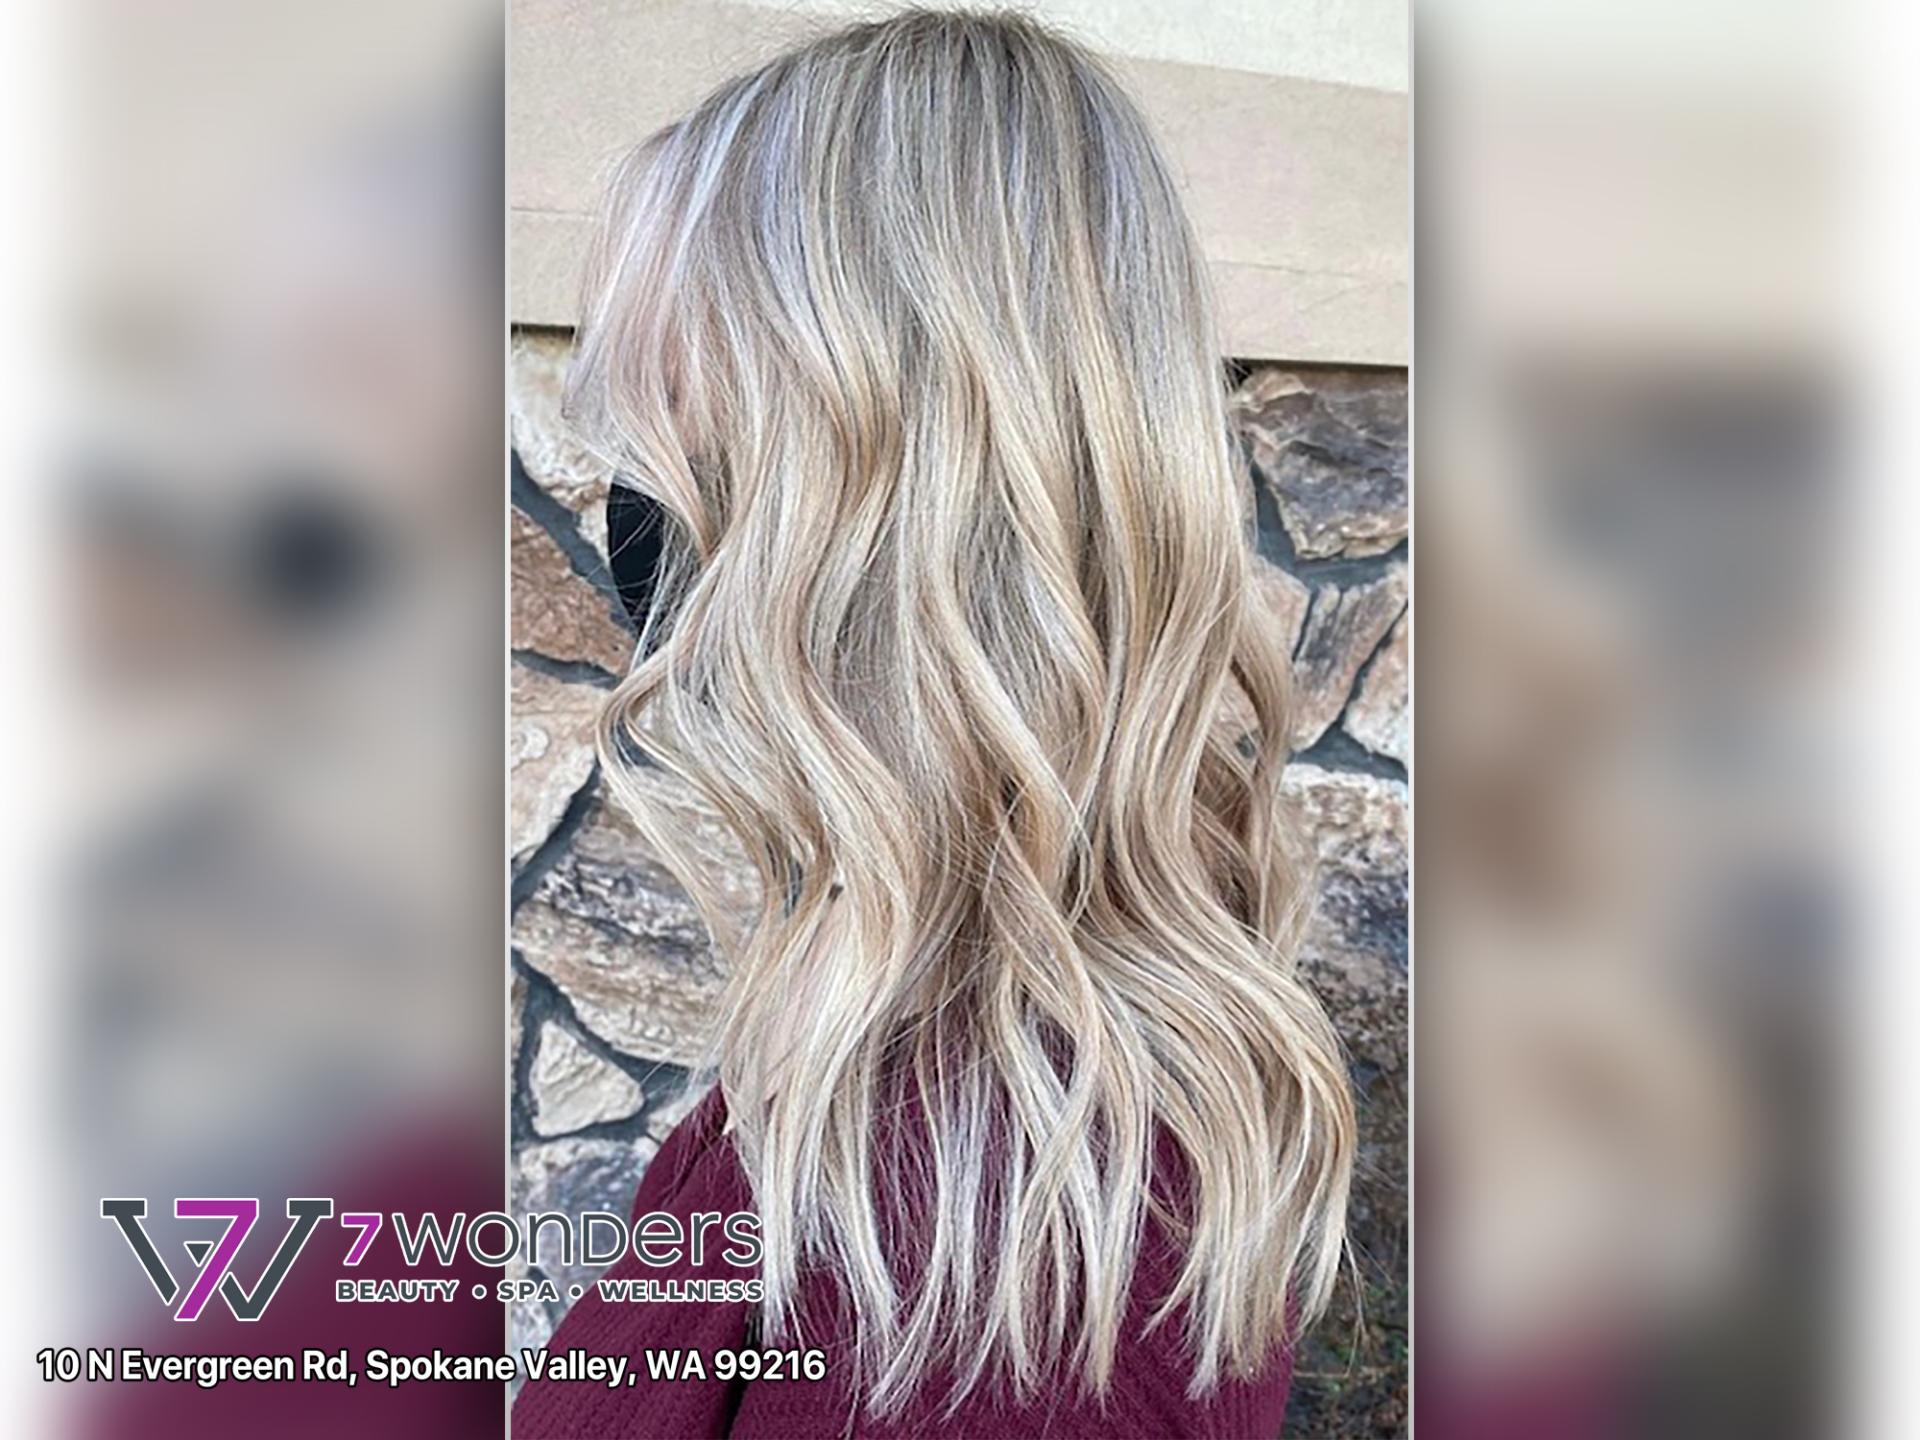 8 Types Of Hair Color Ideas To Switch Up Your Style | 7 Wonders Barber and Spa in Spokane Valley, WA 99216